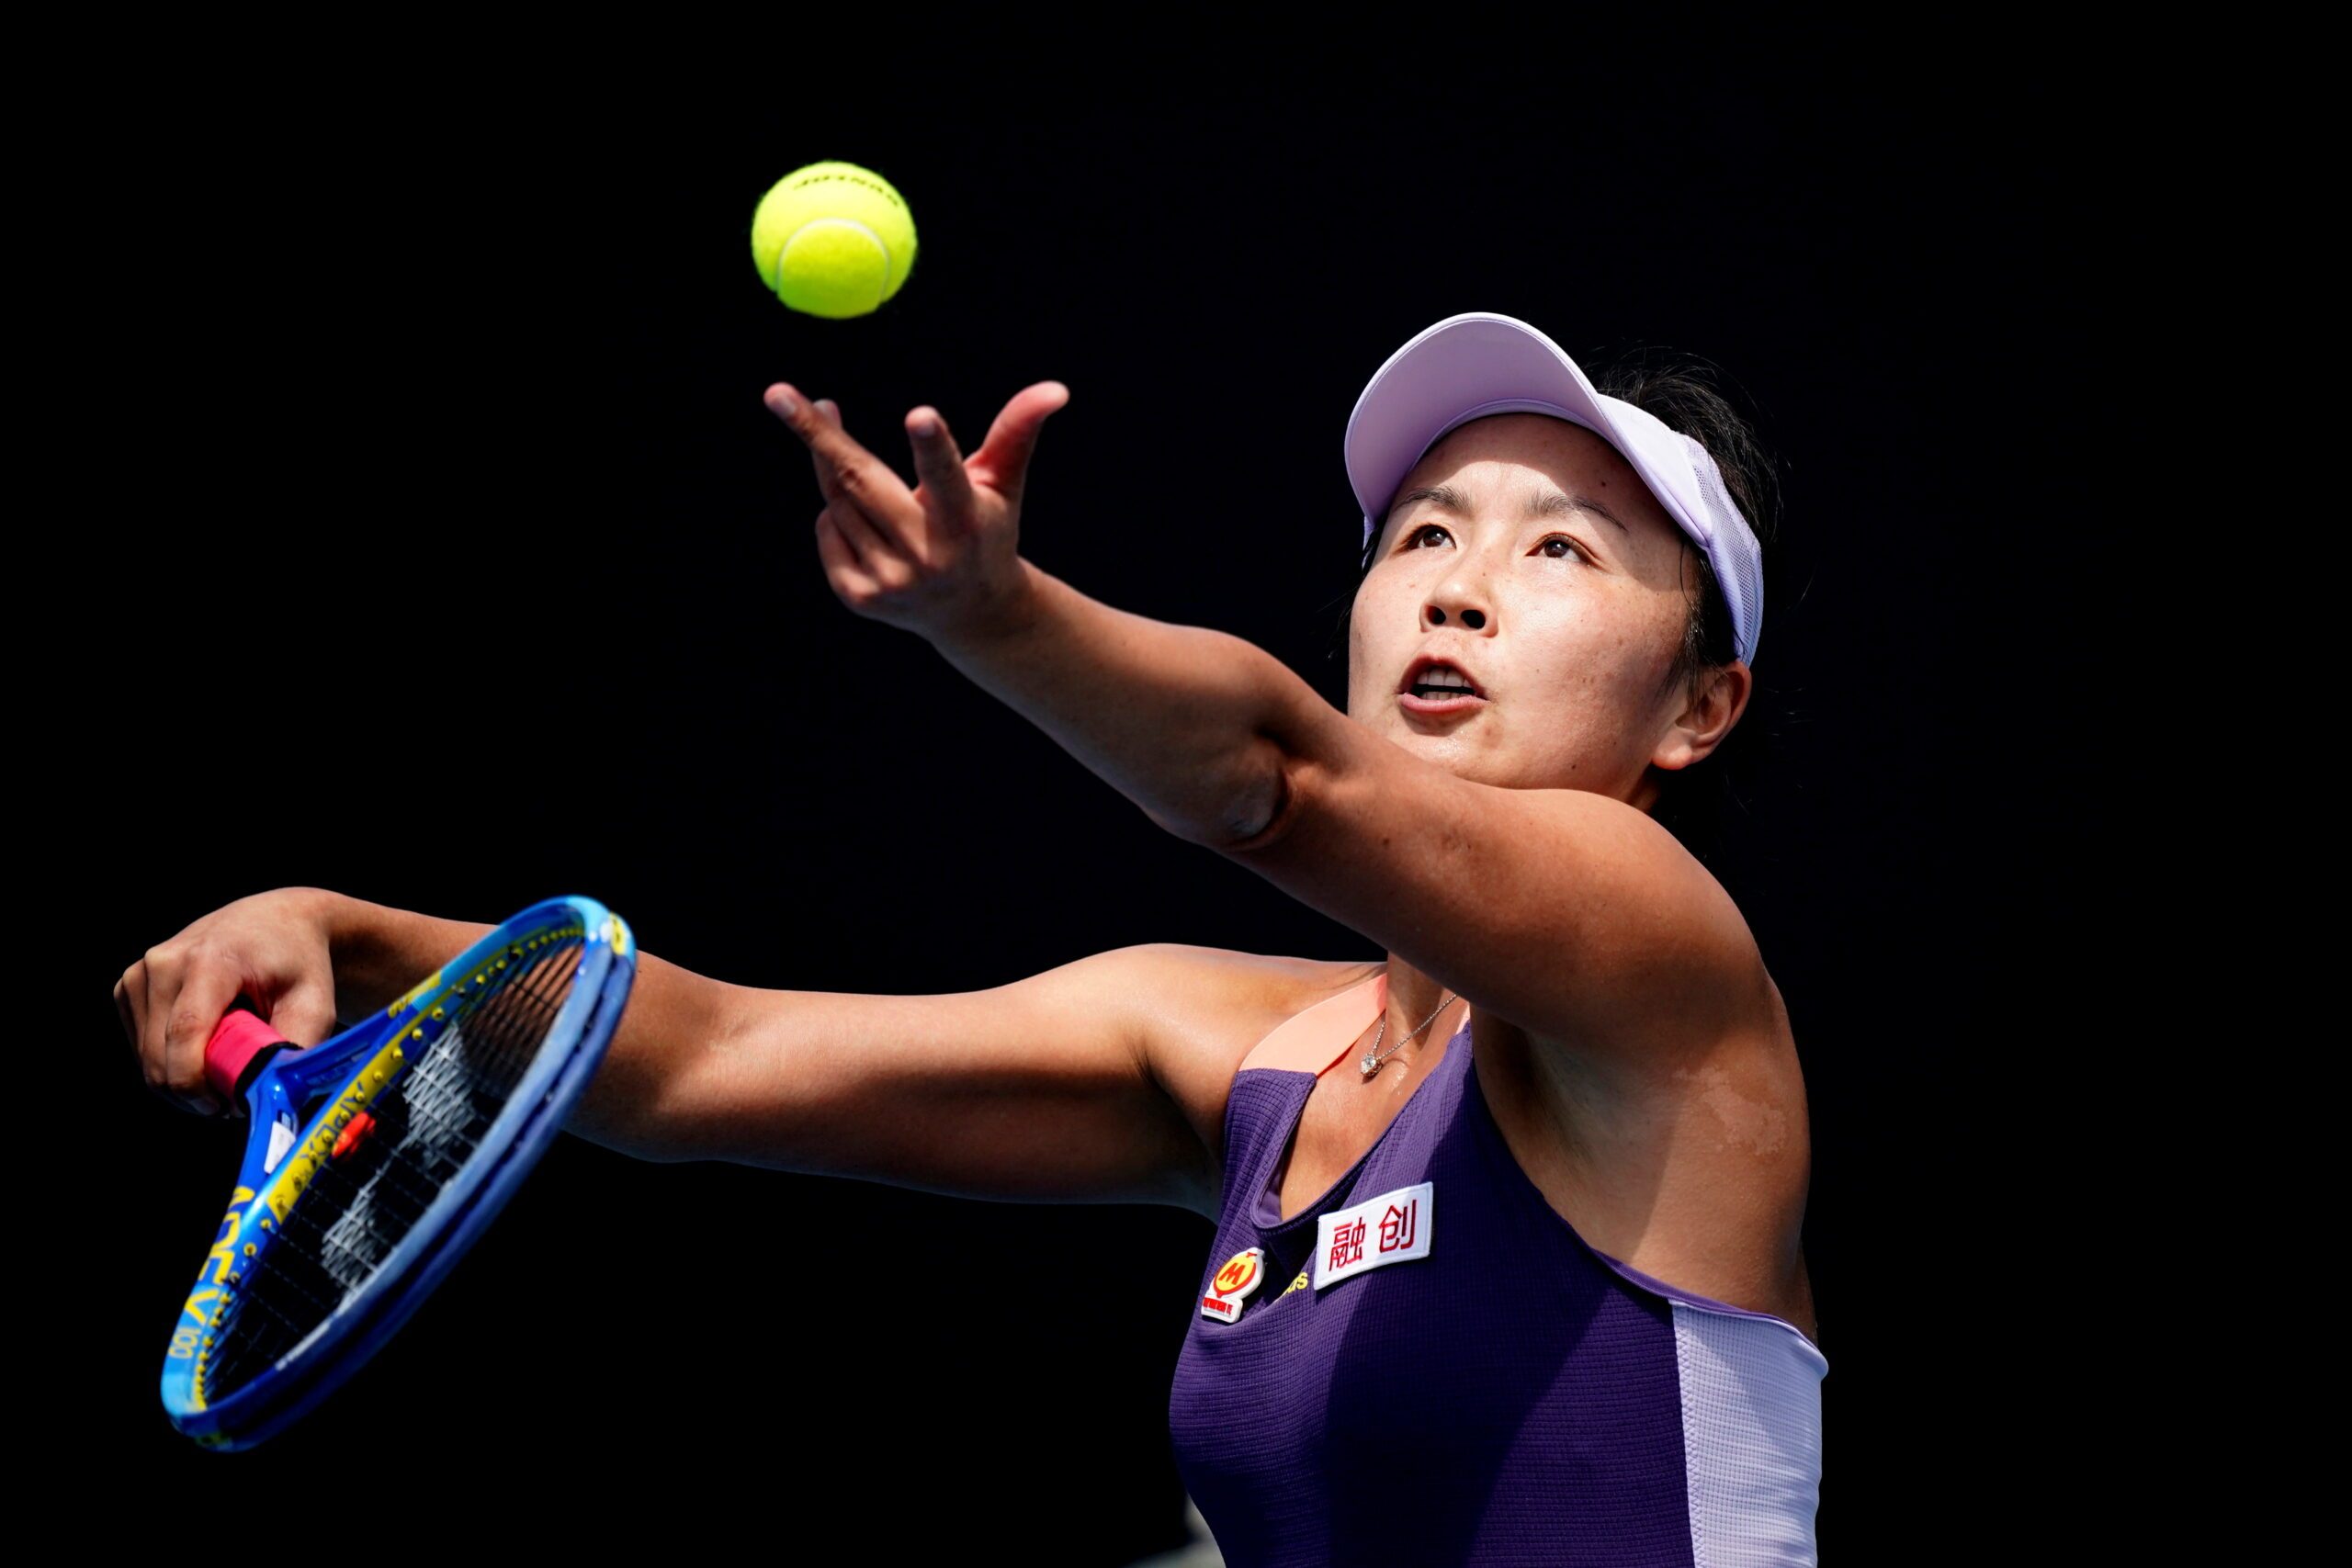 WTA not returning to China in 2022, wants resolution to Peng case